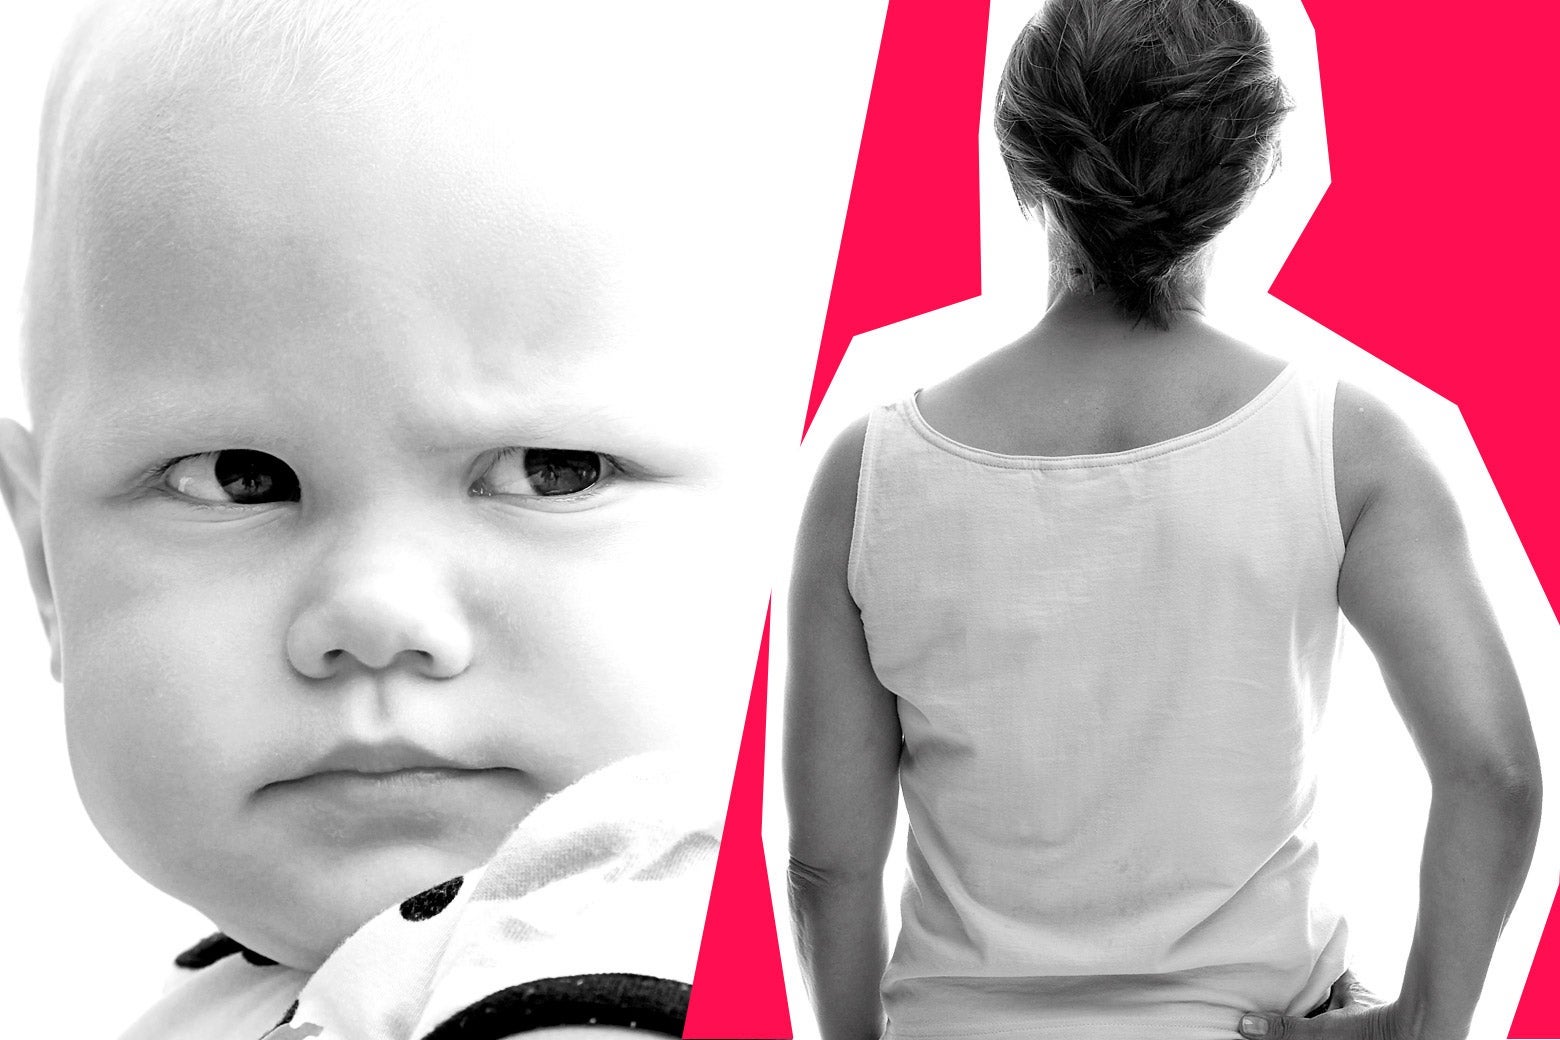 Left, a baby giving side-eye. Right, a woman's back.